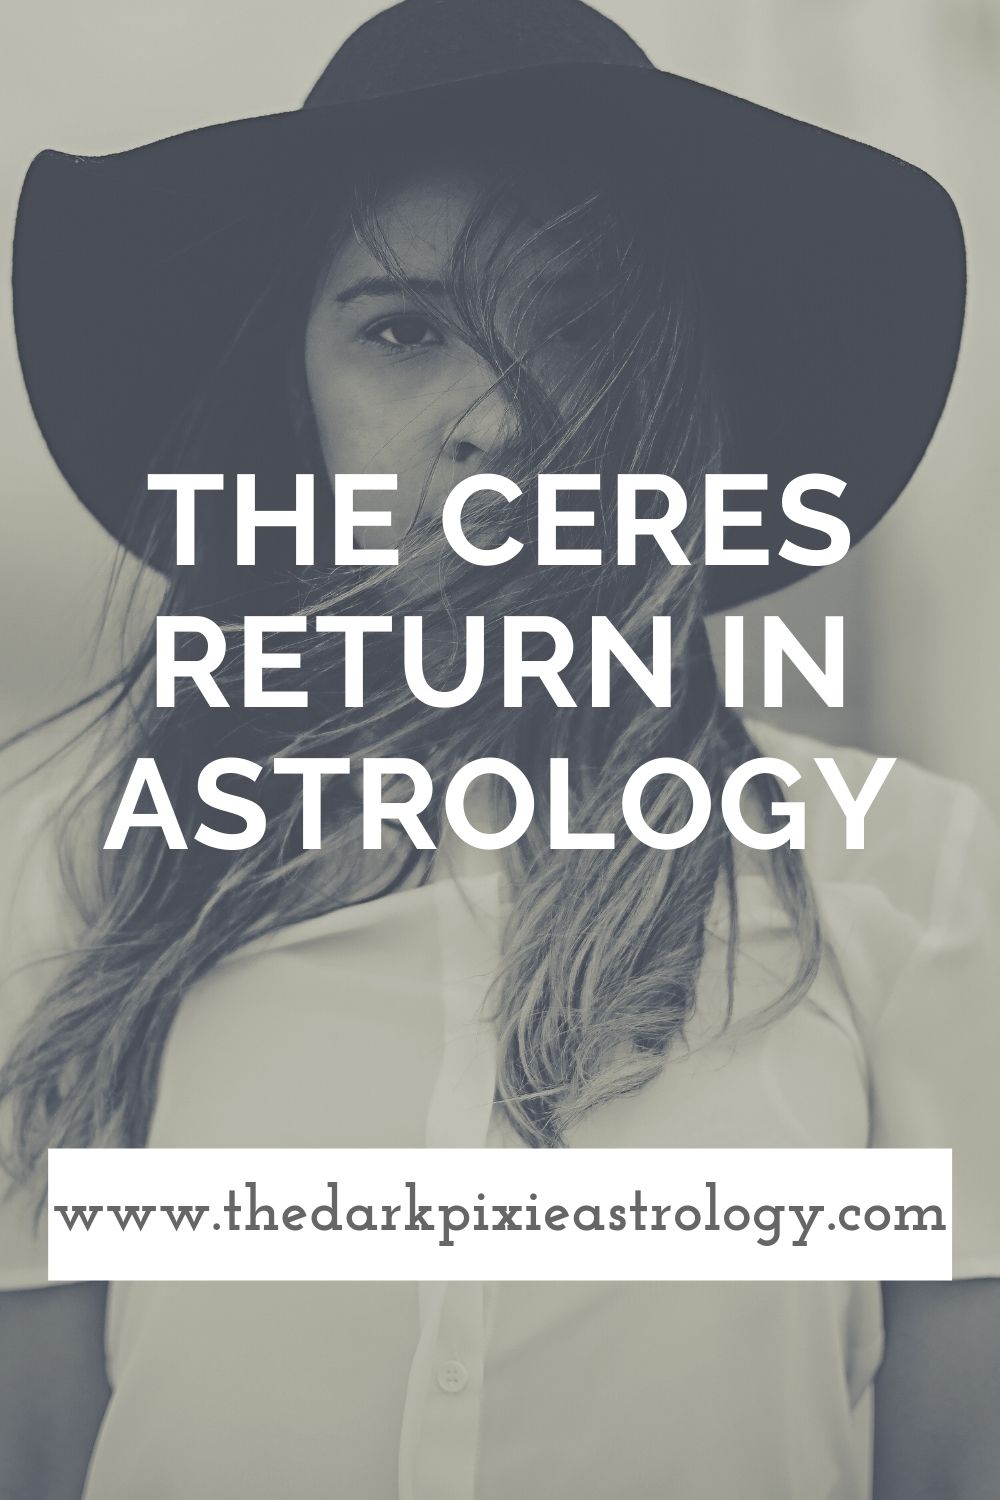 The Ceres Return in Astrology - The Dark Pixie Astrology